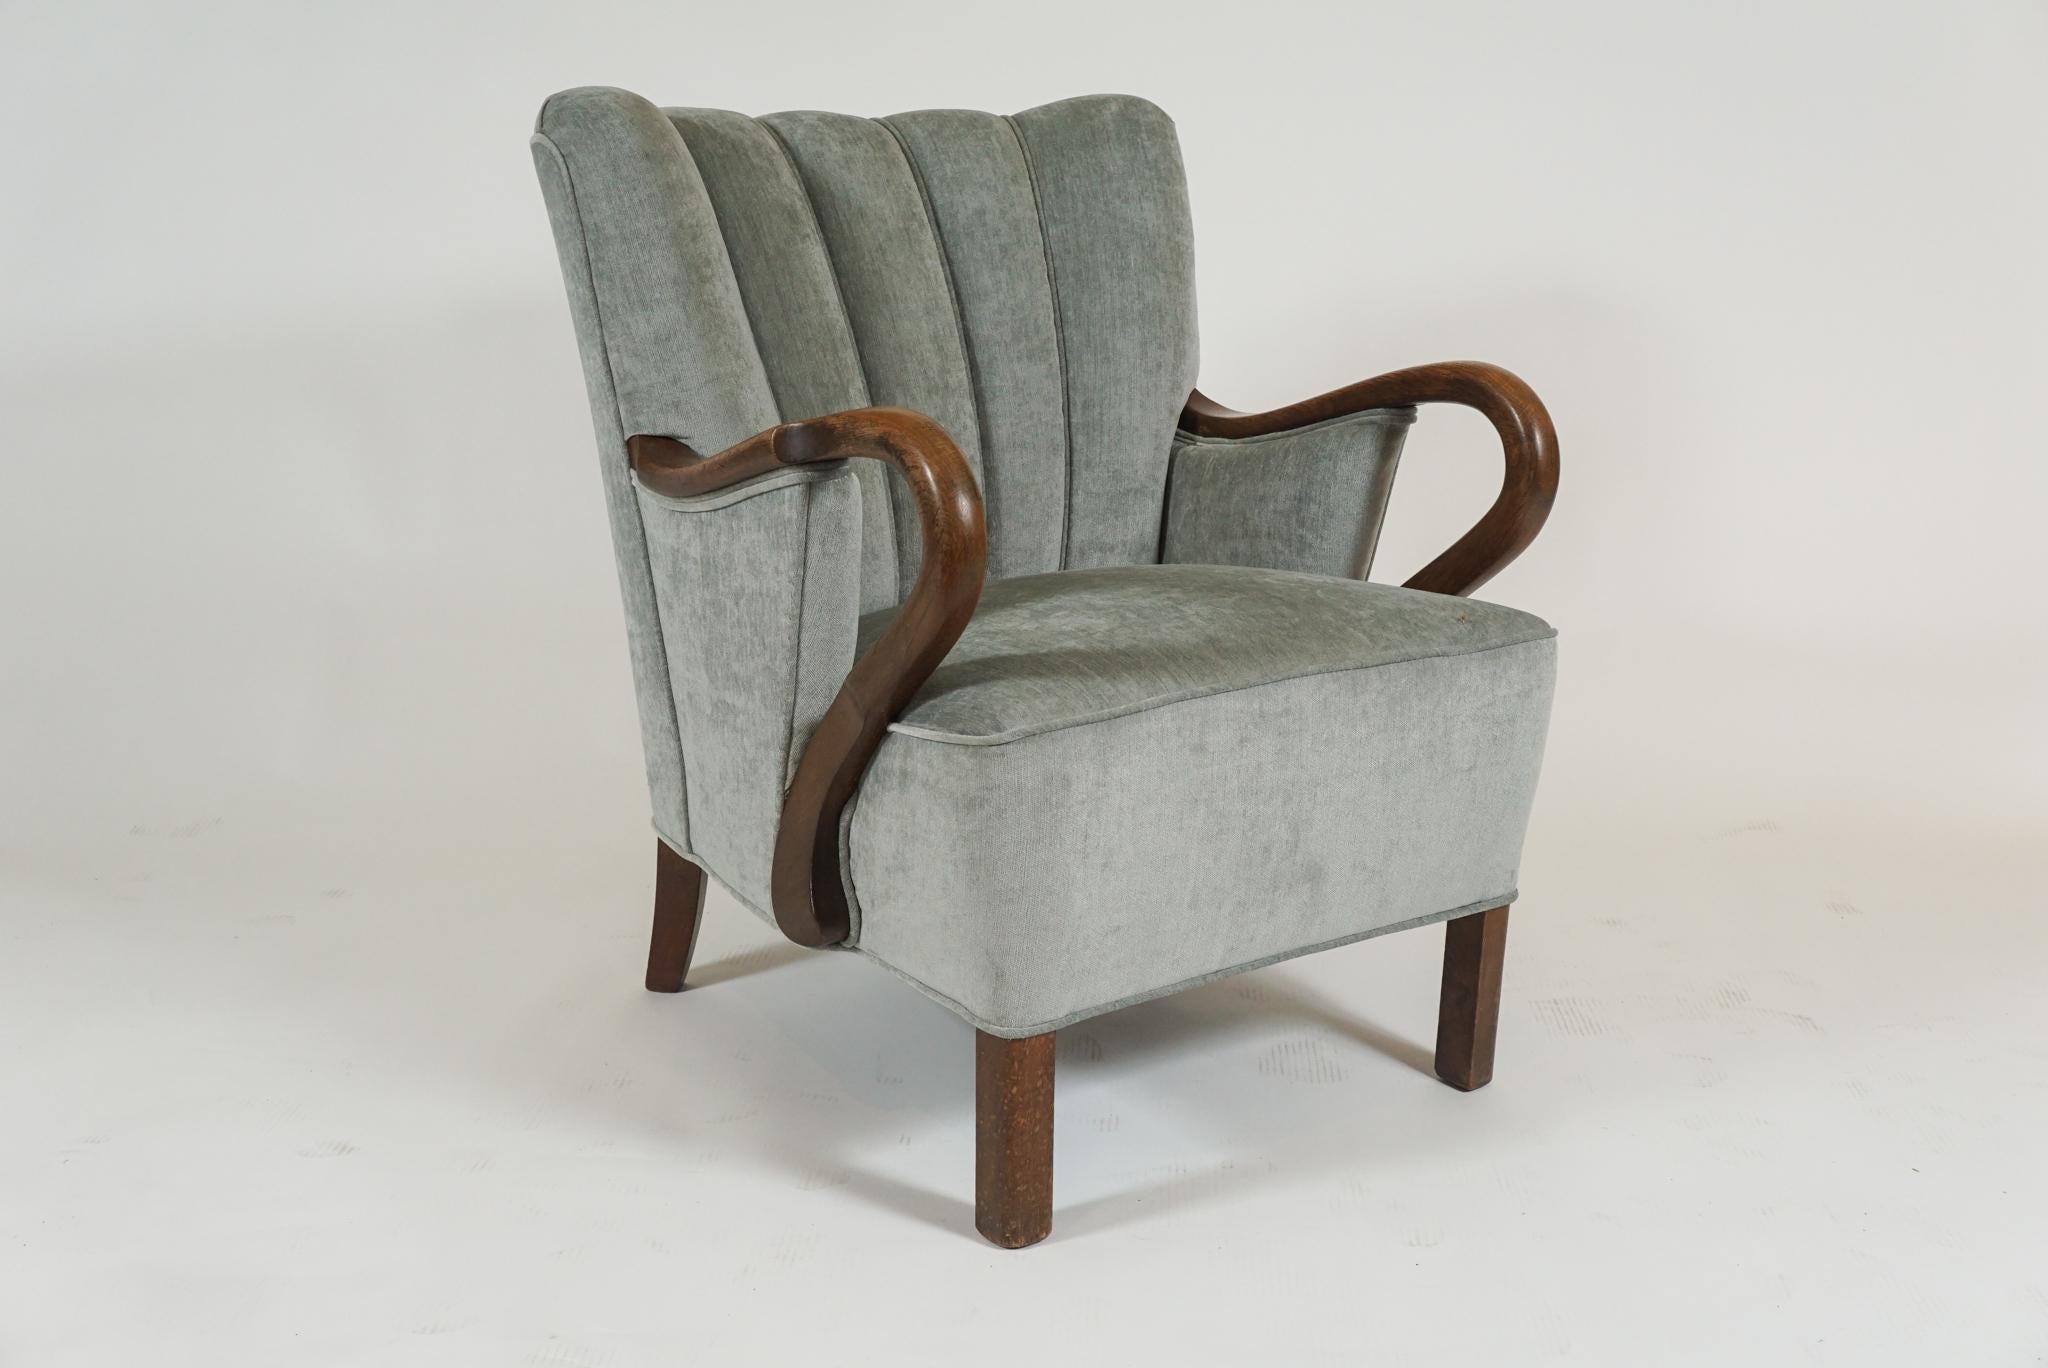 Hand-Crafted Pair of Danish Modern 1940s Armchairs